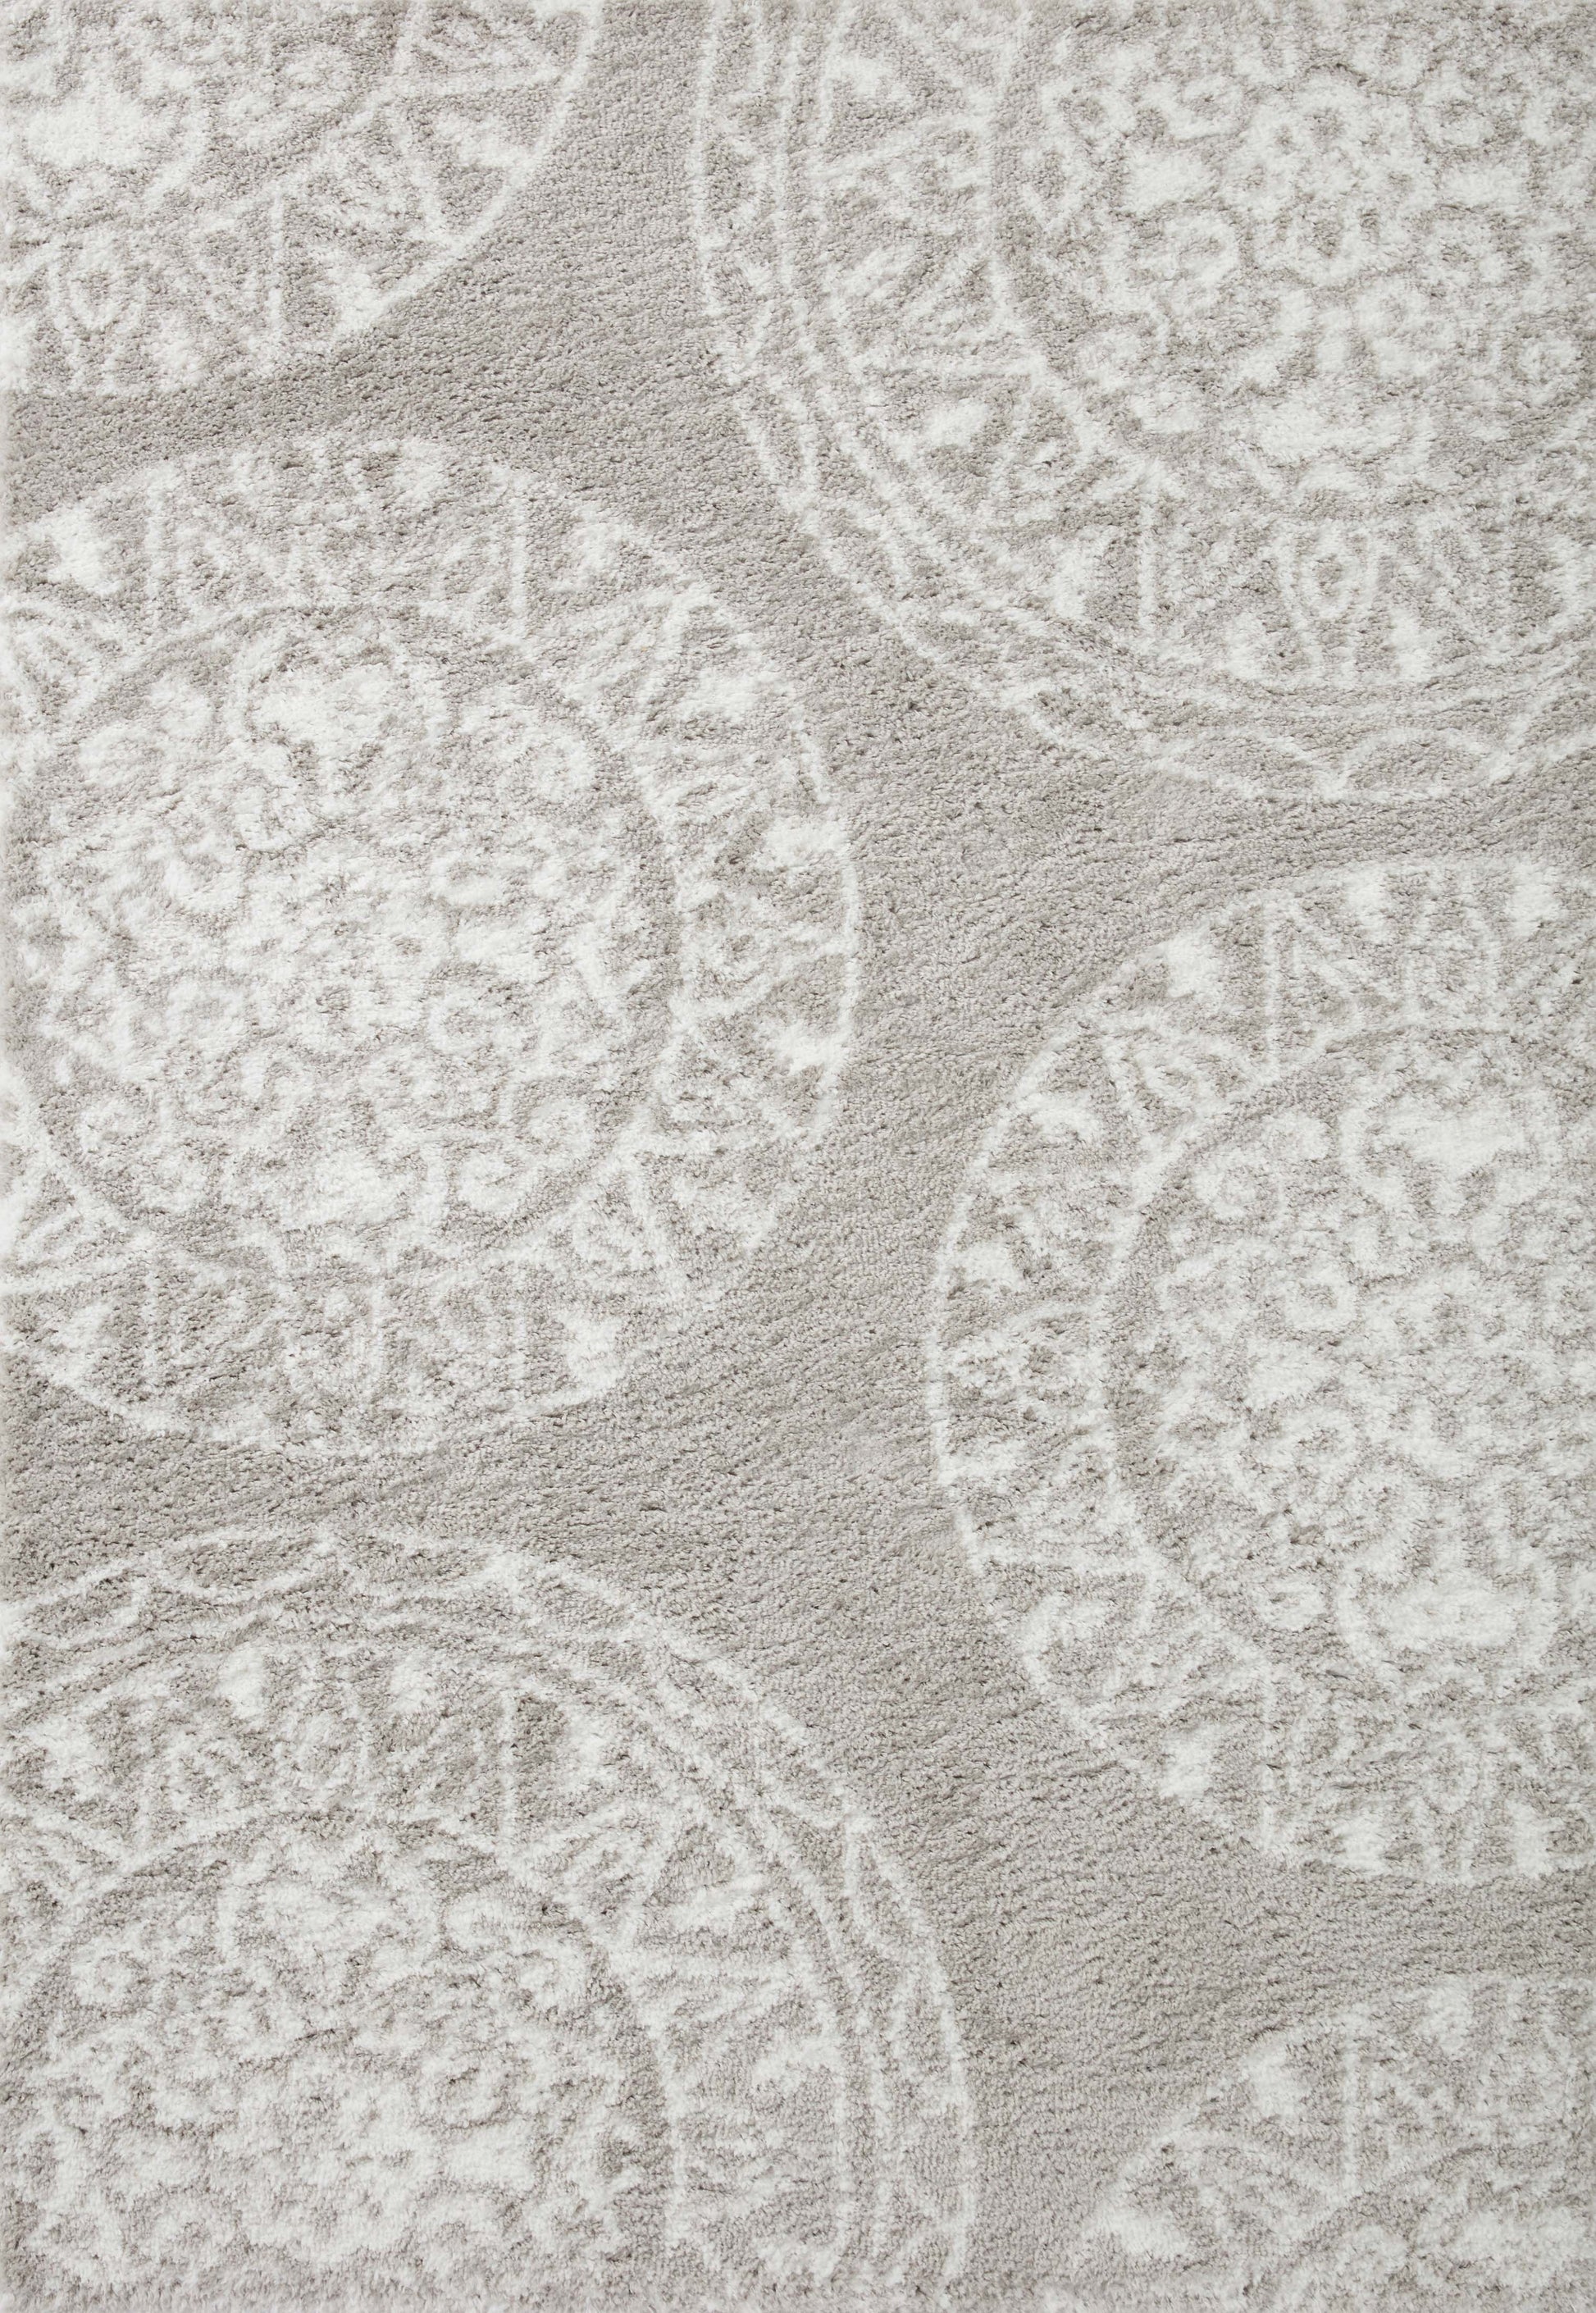 A picture of Loloi's Bliss Shag rug, in style BLS-06, color Grey / White